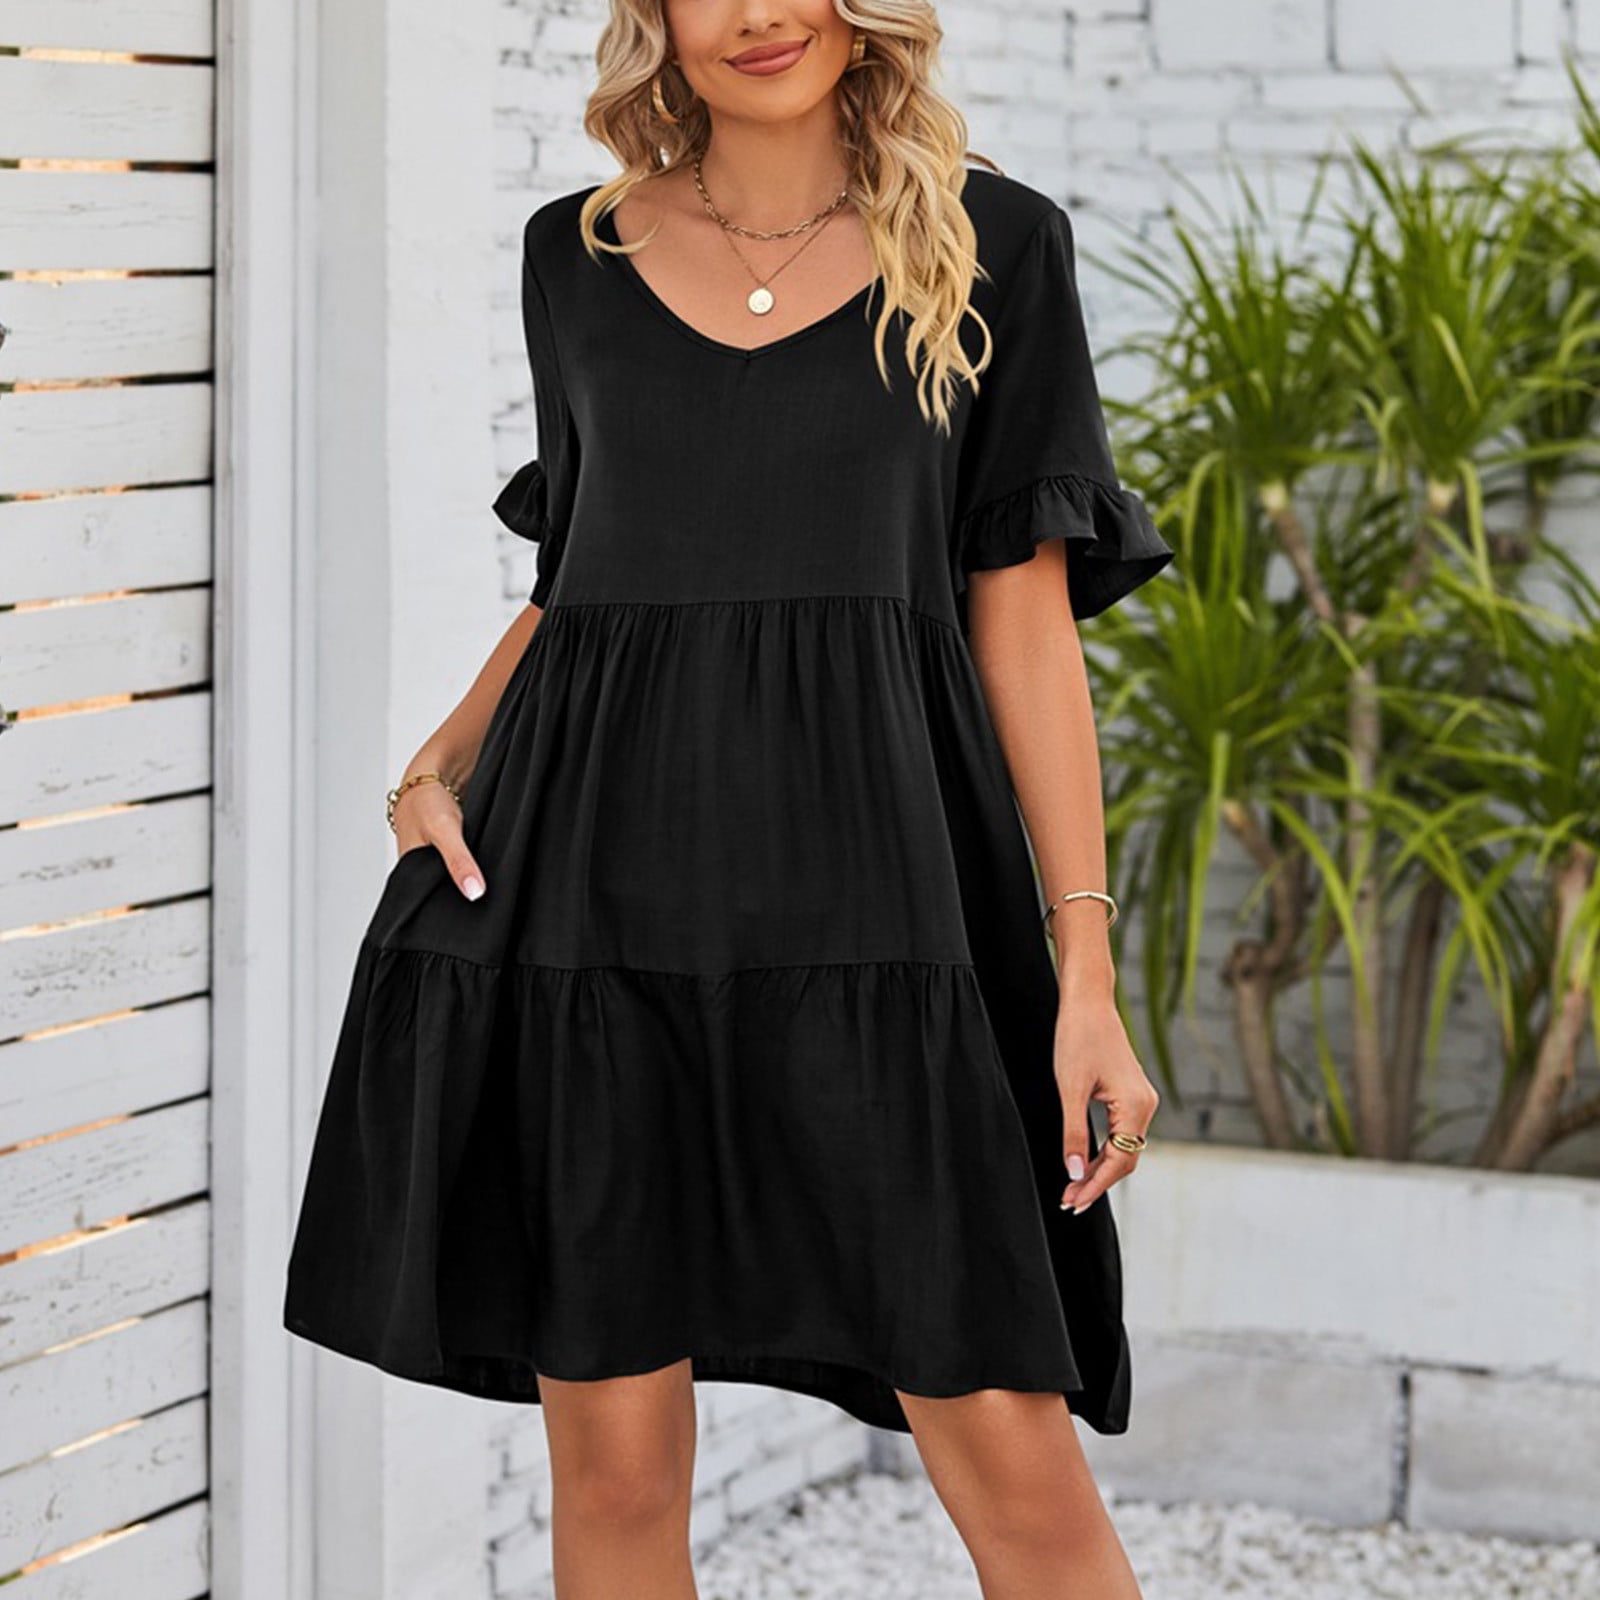 simple black dress for funeral